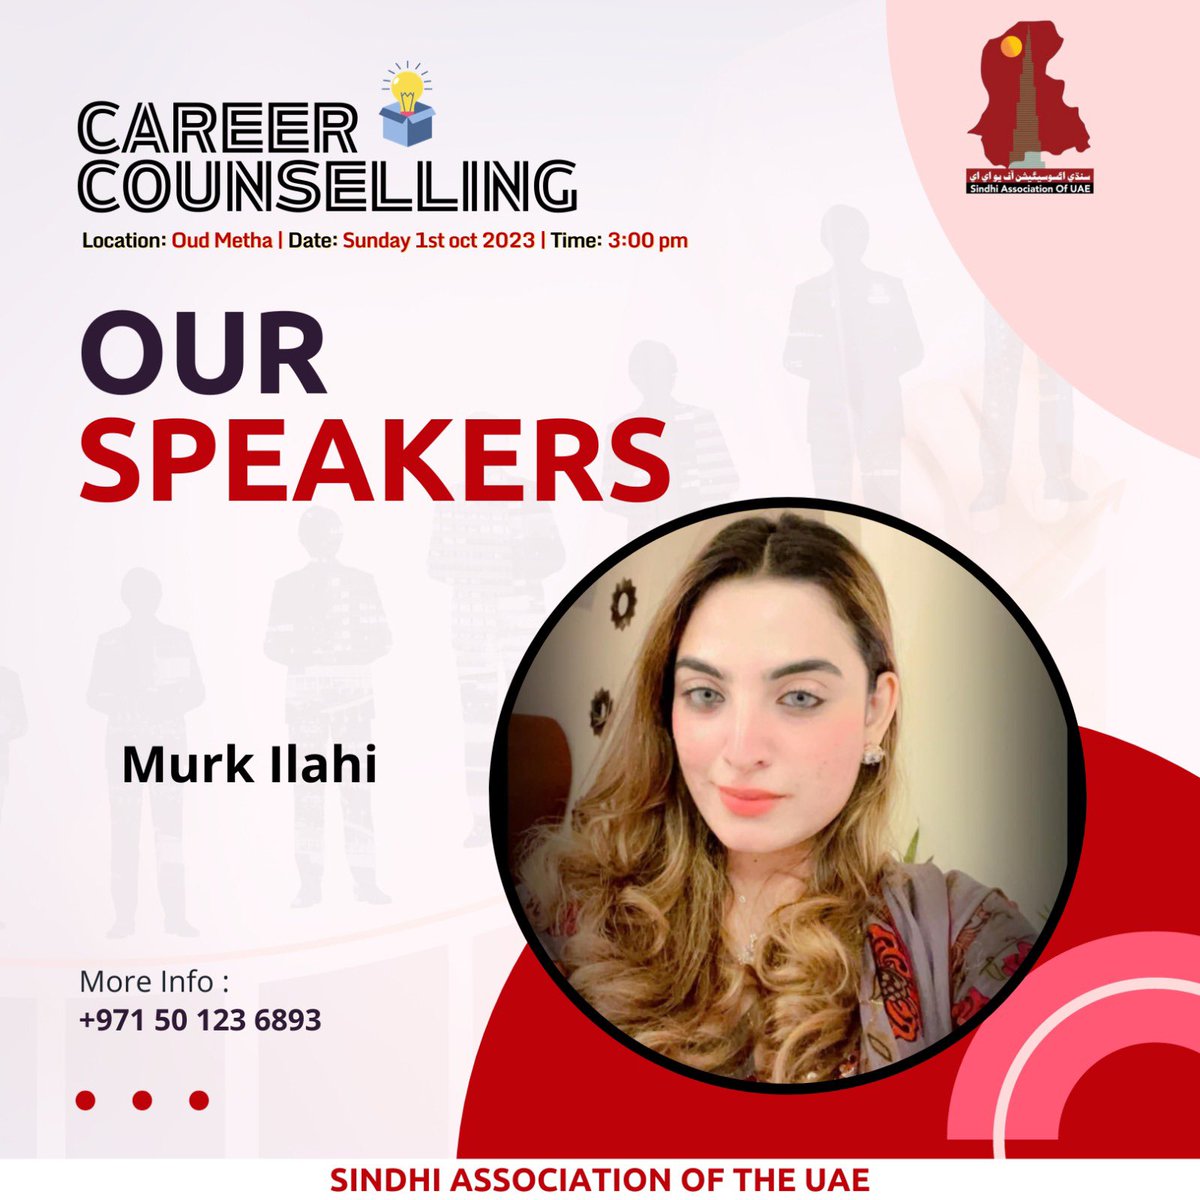 Excited to invite you to a valuable job event! Join us for networking, insights, and career opportunities. Contact me for details. Looking forward to your presence! #CareerEvent #Networking #SindhaccociationUAE 🇦🇪